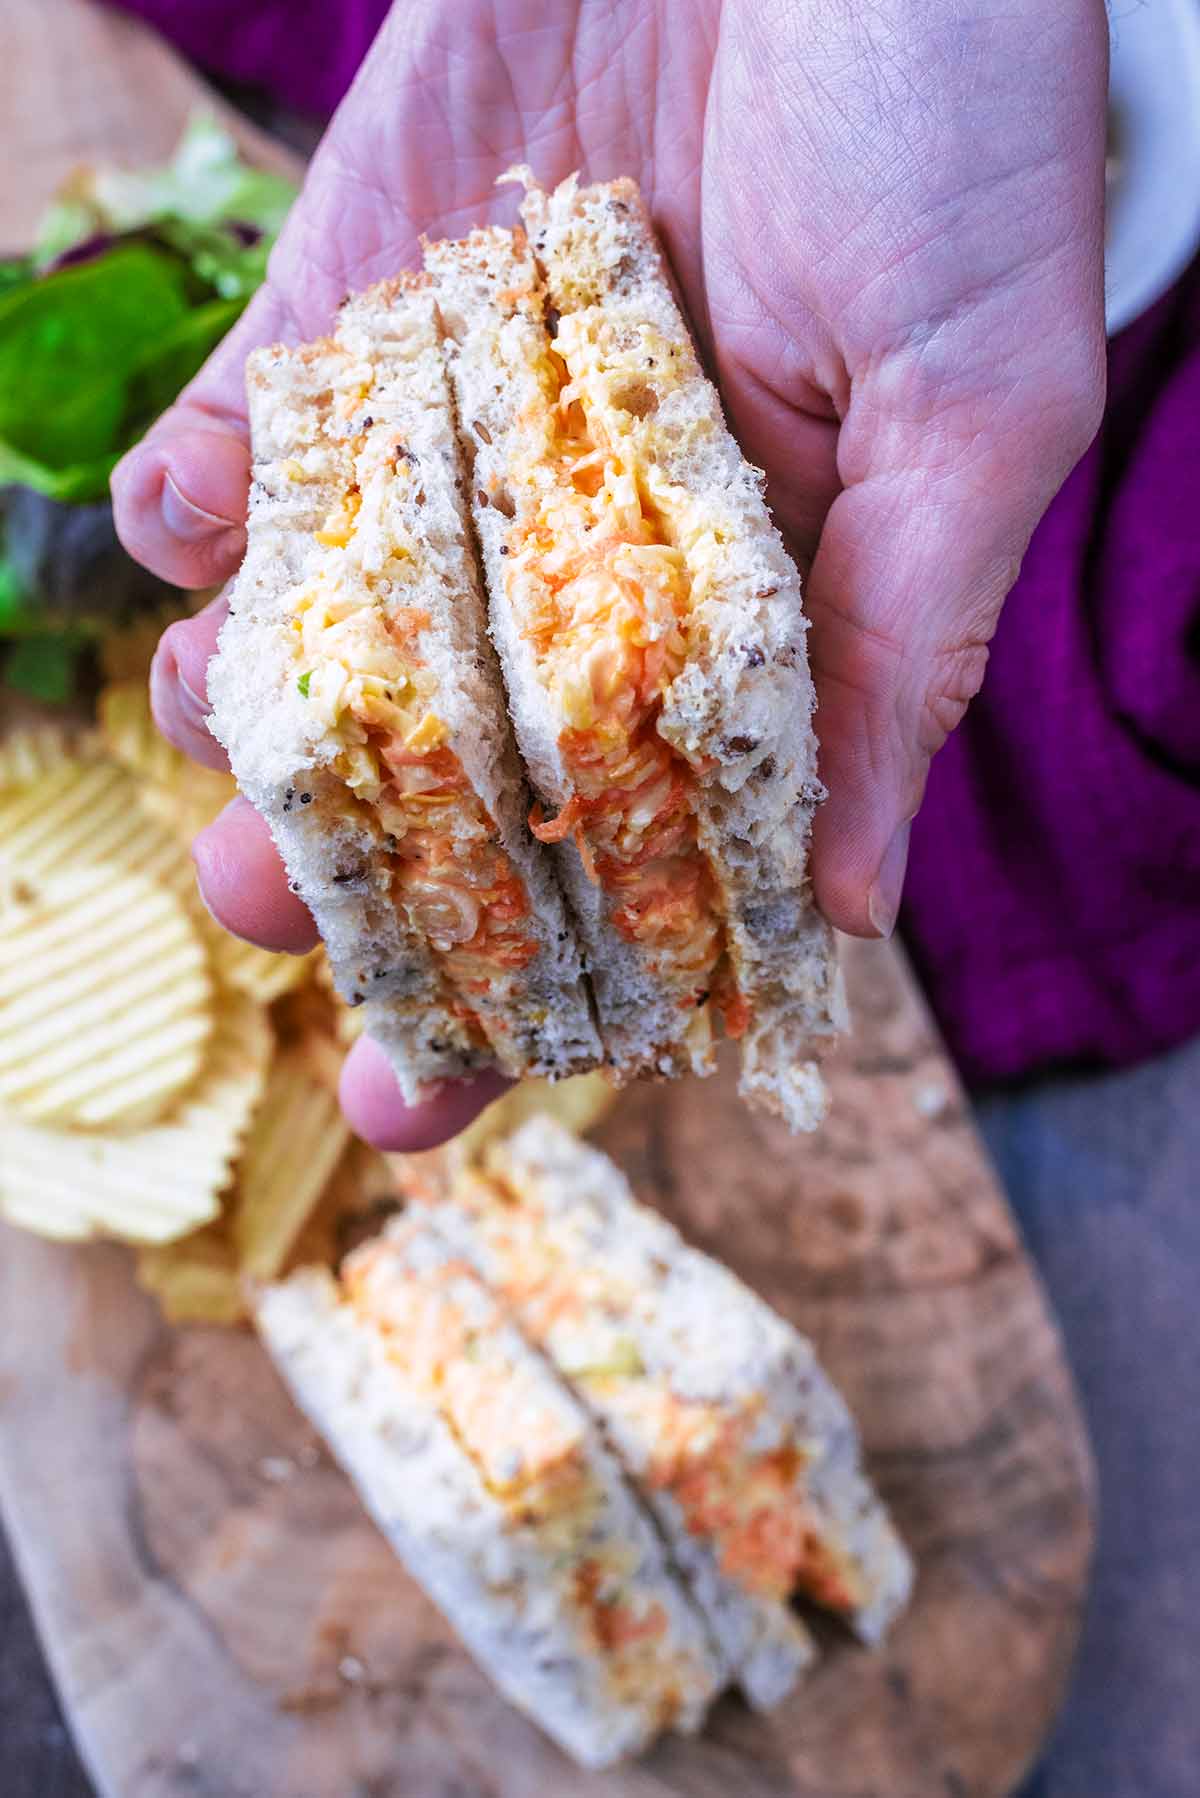 A hand holding a cheese sandwich.